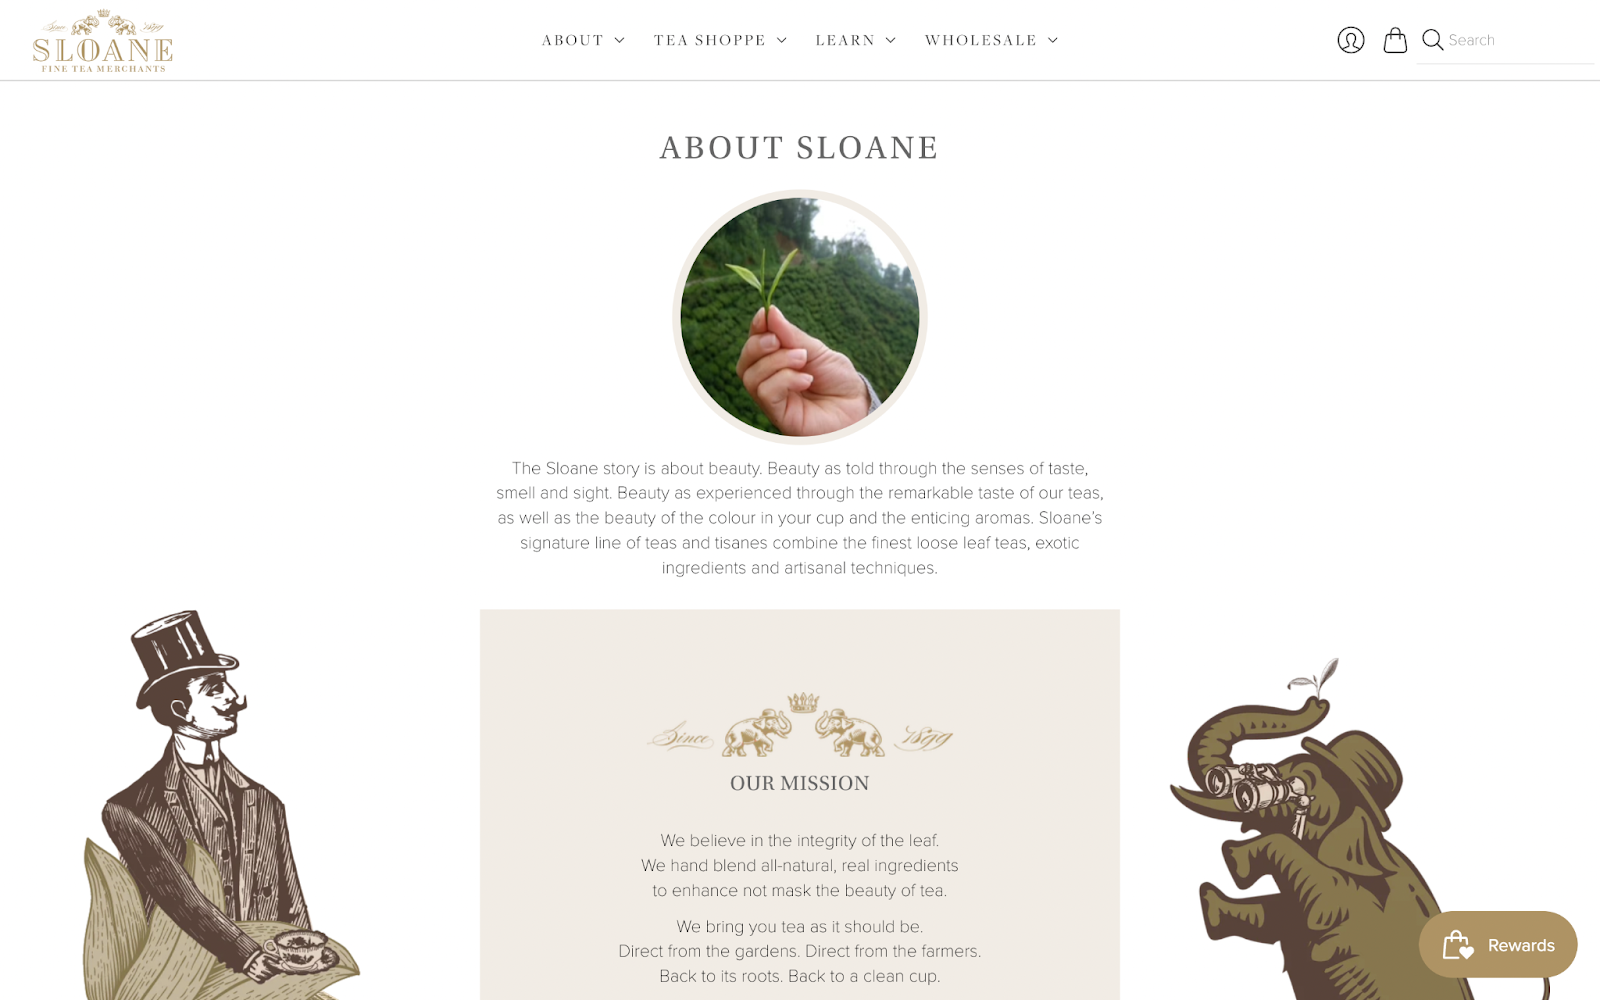 Where should customer referrals land–A screenshot of Sloane Tea’s “About Sloane” Page. There is an image of a hand holding a small plant, as well as sepia tone illustrations of a man in a top hat holding a cup of tea and an elephant with binoculars. The text reads, “The Sloane story is about beauty. Beauty as told through the senses of taste, smell and sight. Beauty as experienced through the remarkable taste of our teas, as well as the beauty of the colour in your cup and the enticing aromas. Sloane’s signature line of teas and tisanes combine the finest loose leaf teas, exotic ingredients and artisanal techniques. Our Mission. We believe in the integrity of the leaf. We hand blend all-natural, real ingredients to enhance not mask the beauty of tea. We bring you tea as it should be. Direct from the gardens. Direct from the farmers. Back to its roots. Back to a clean cup.”